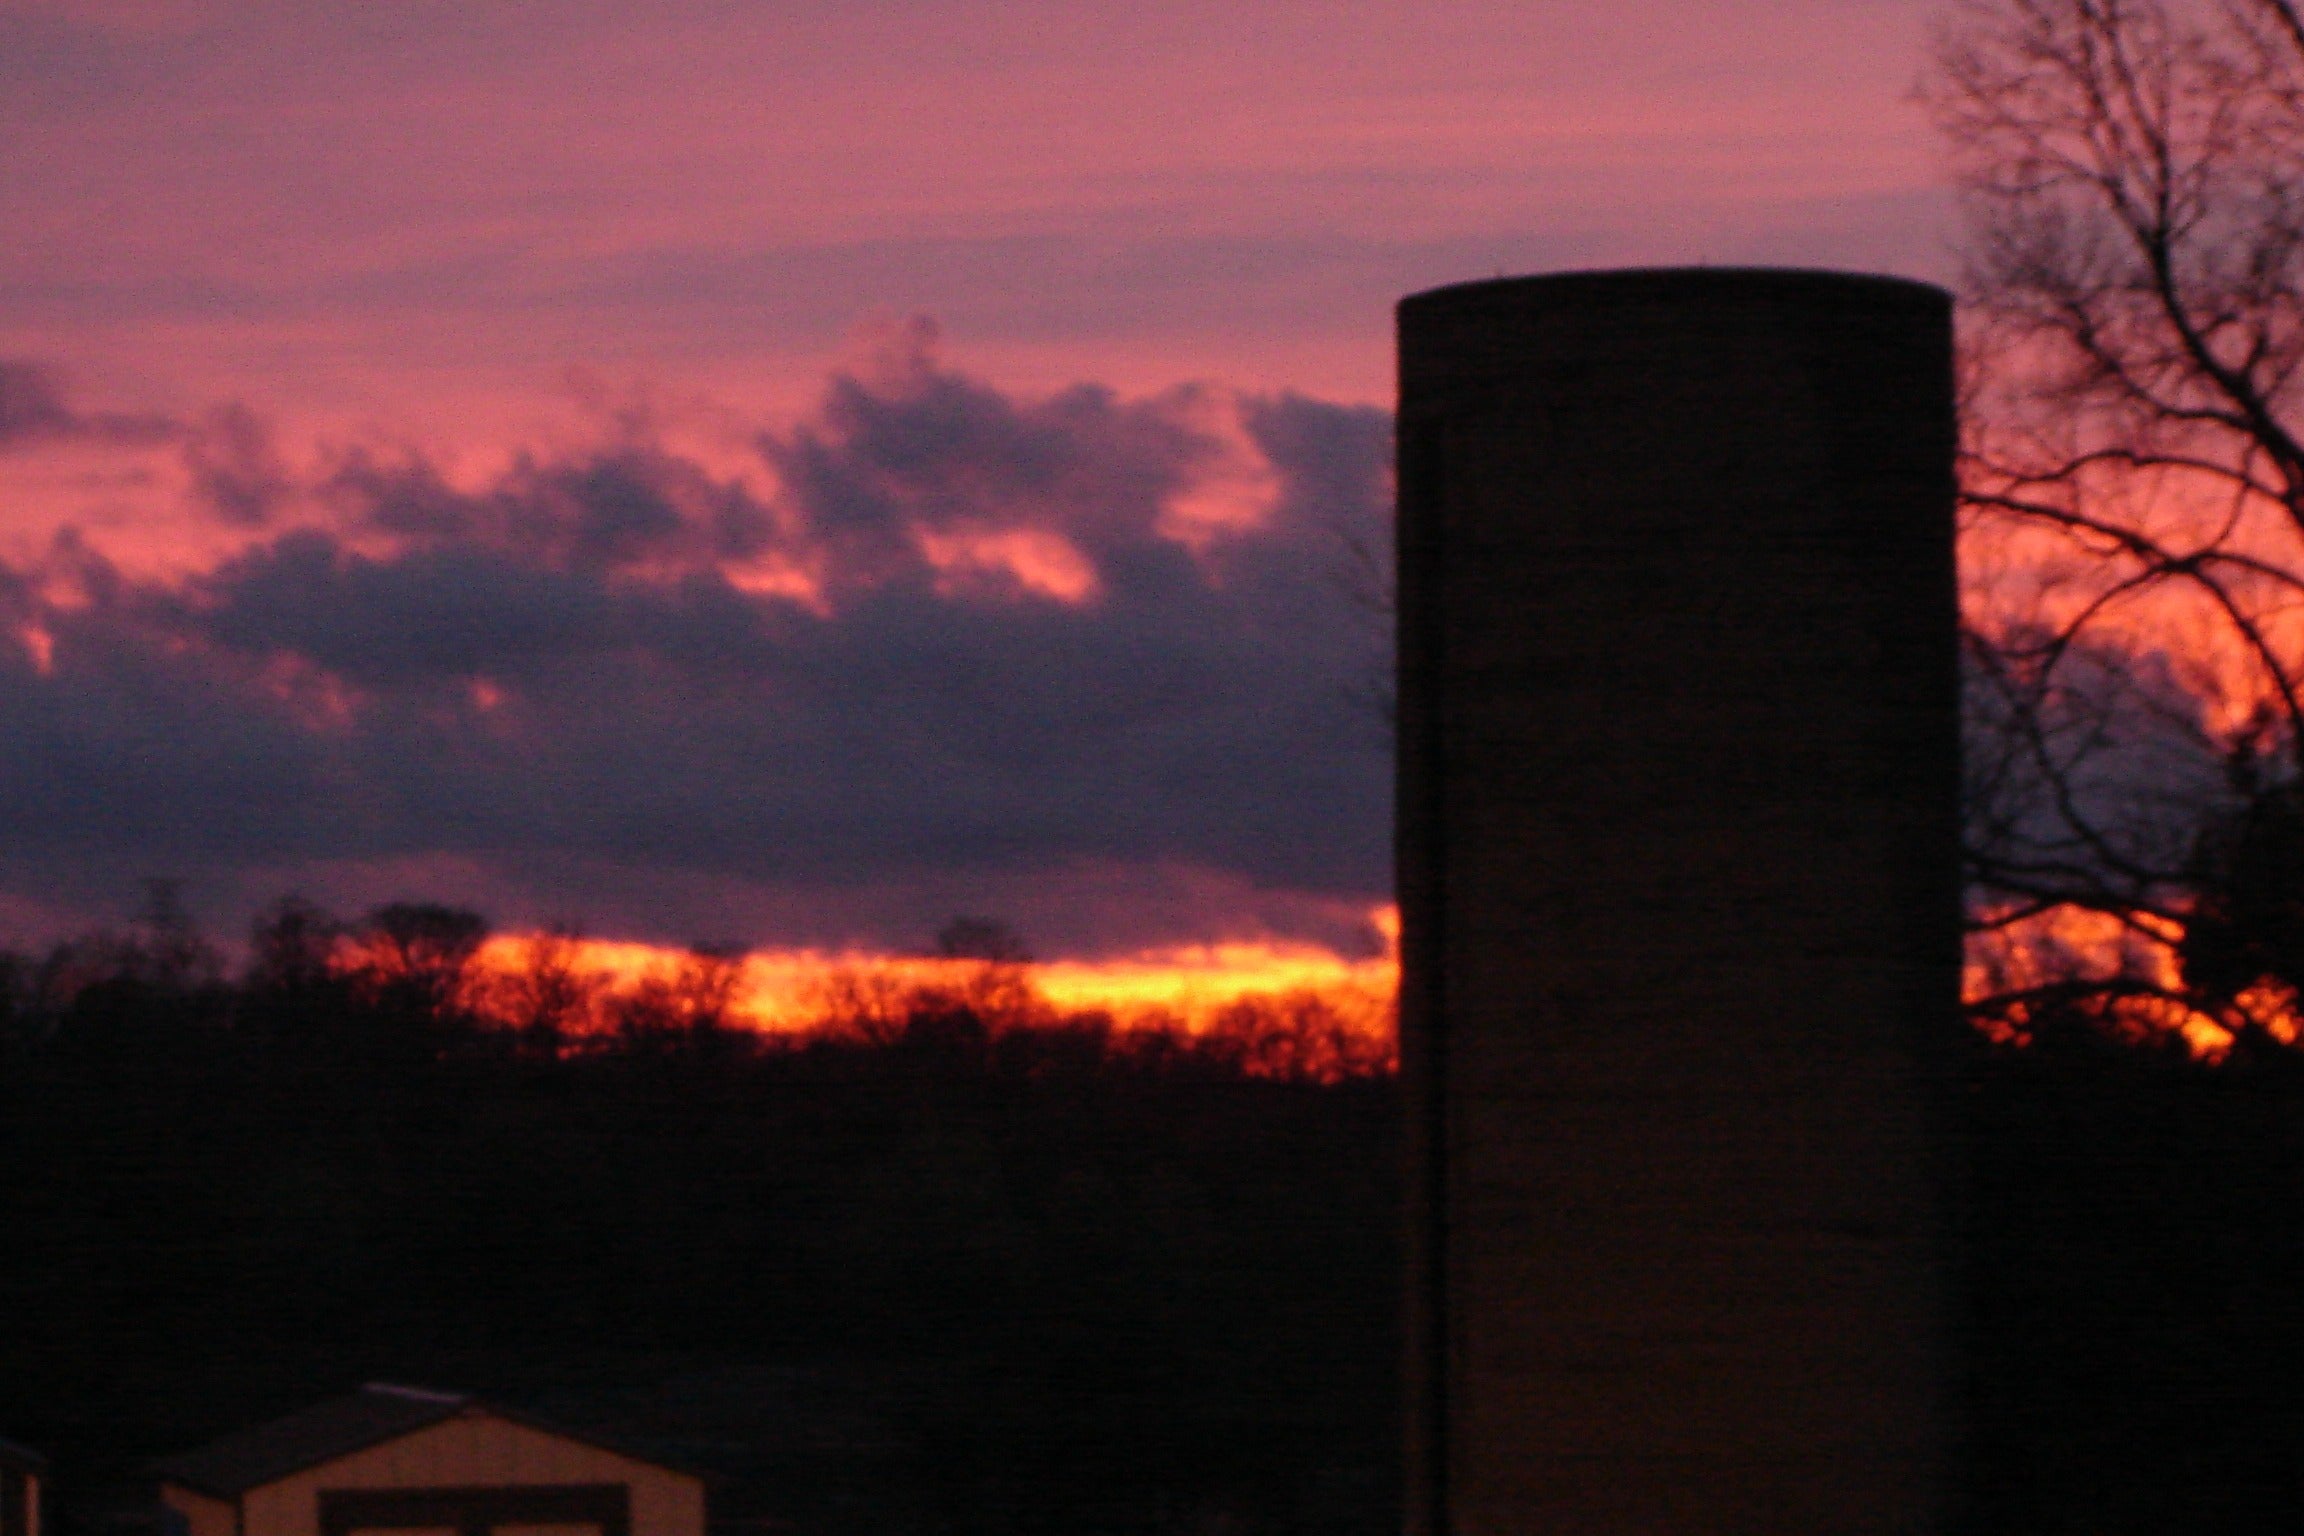 Silo with bright pink and orange sunset